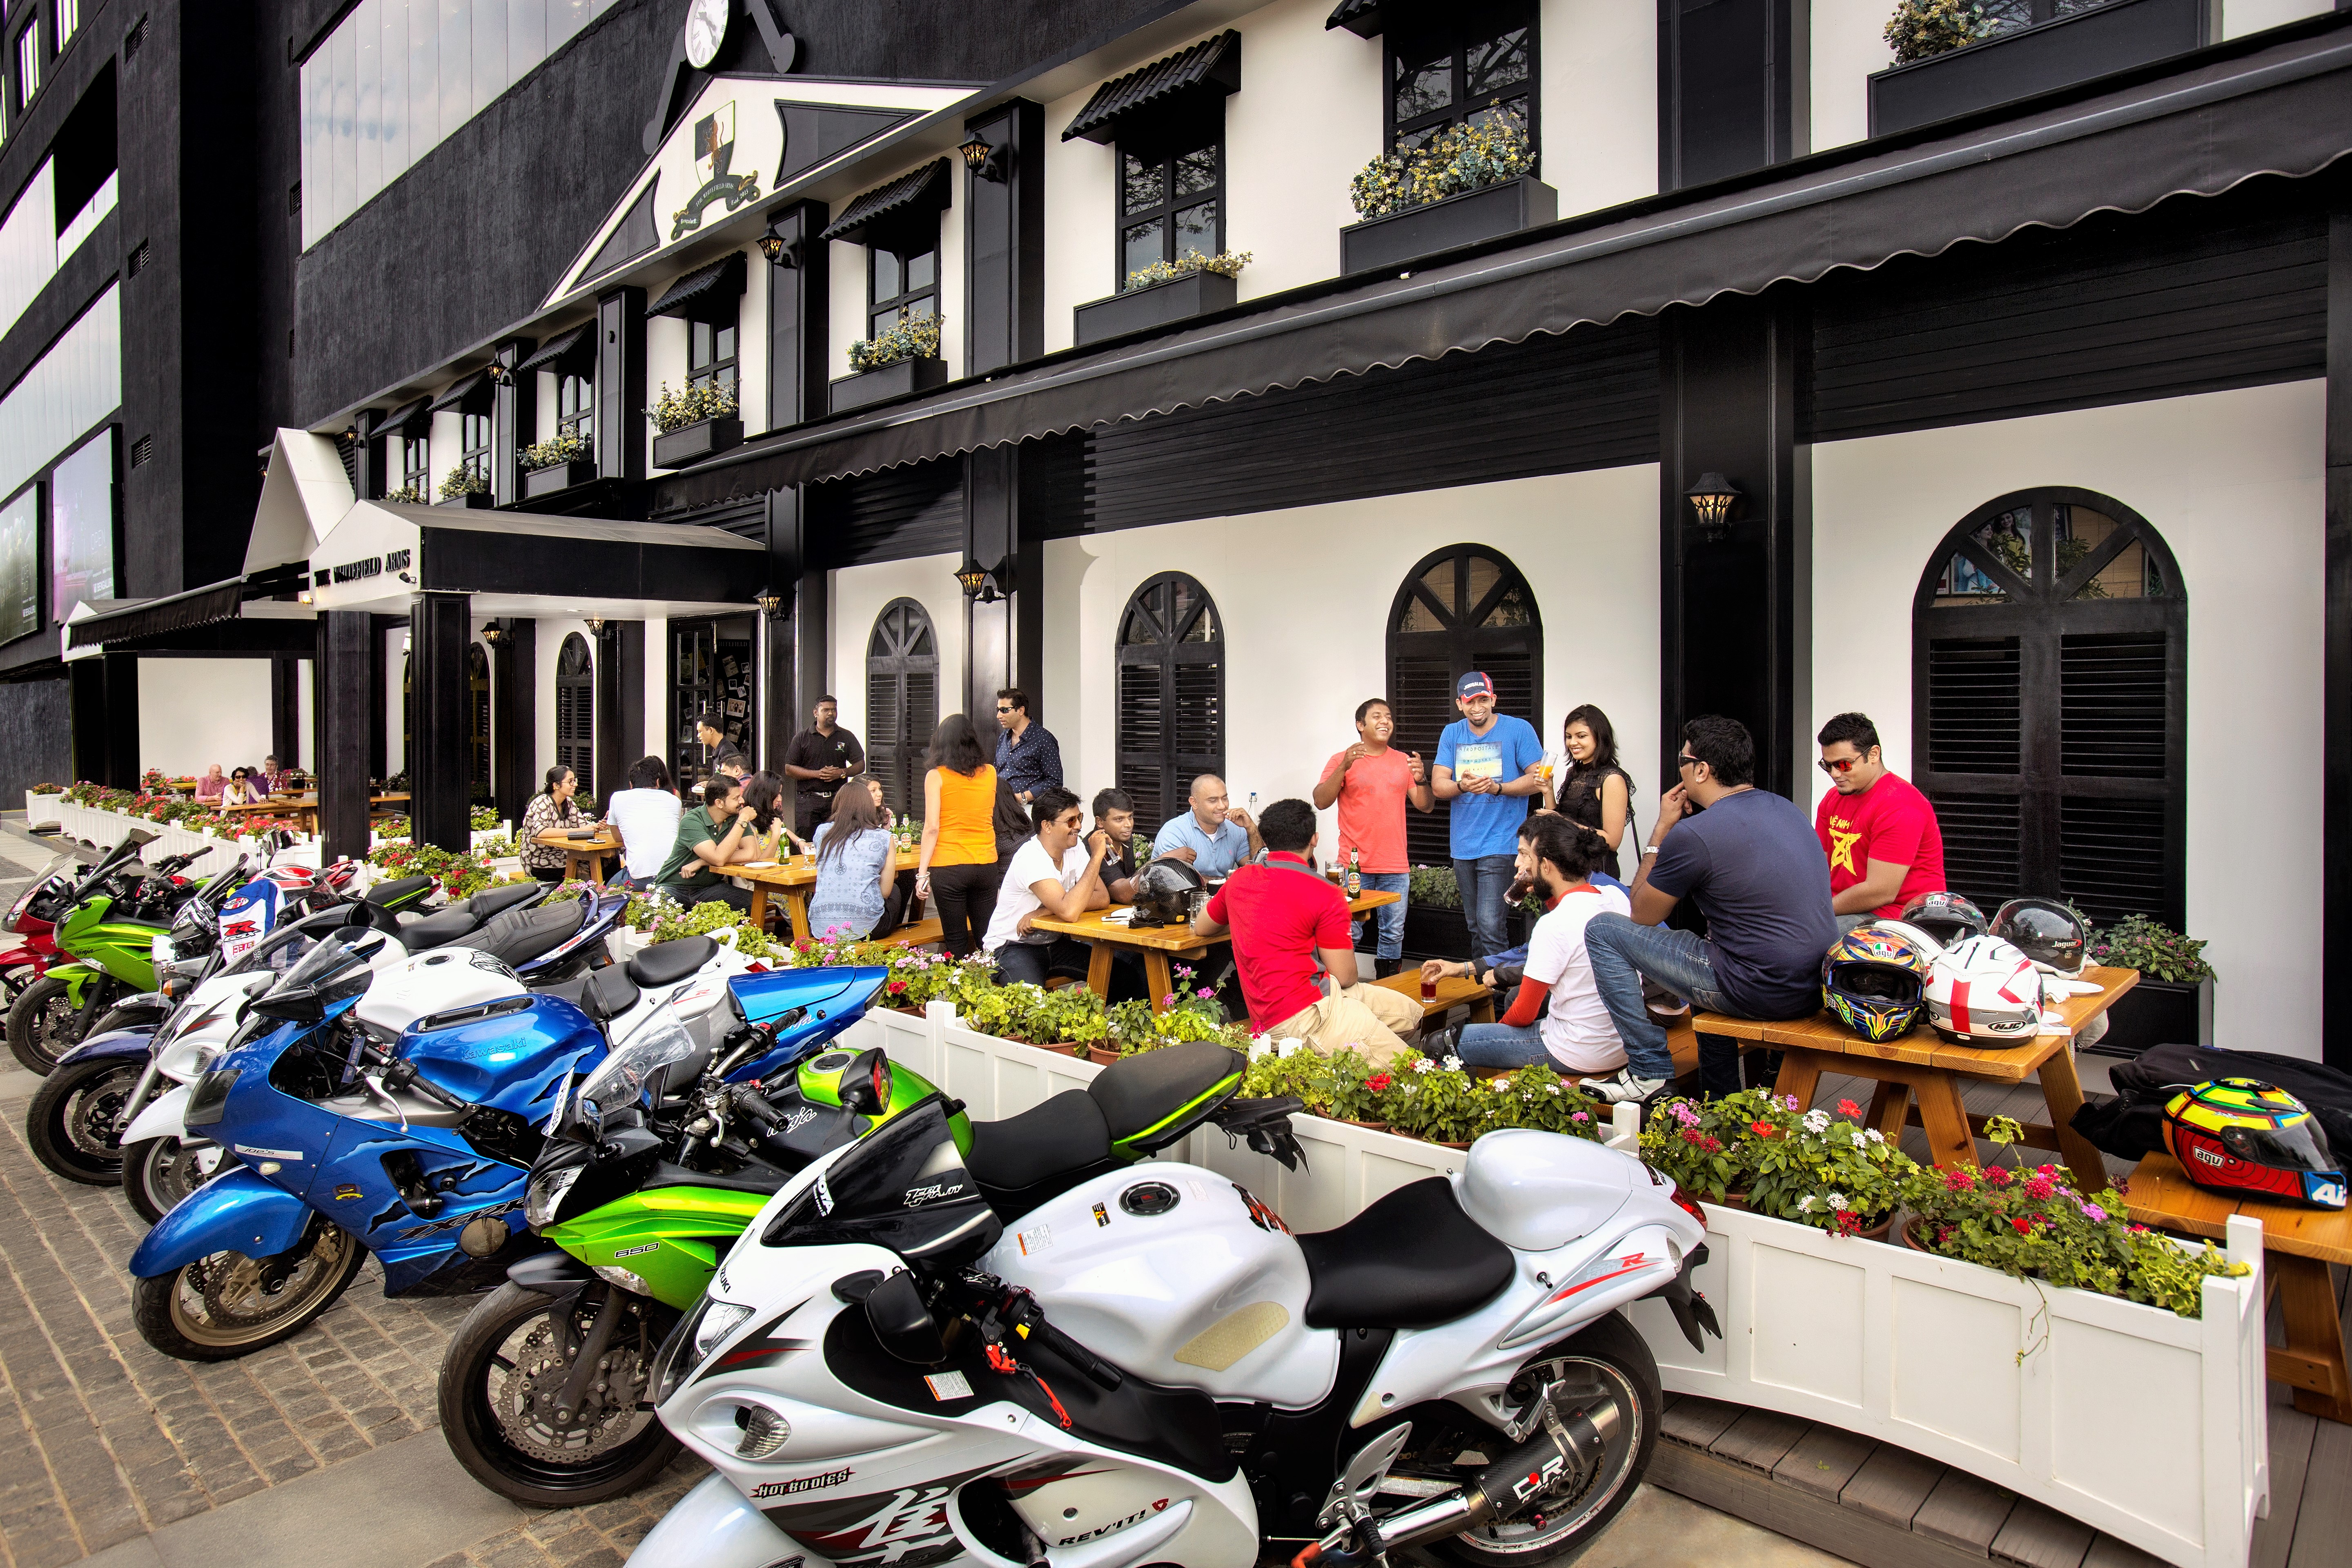 The Whitefield Arms - Bangalore's Quintessential British Pub